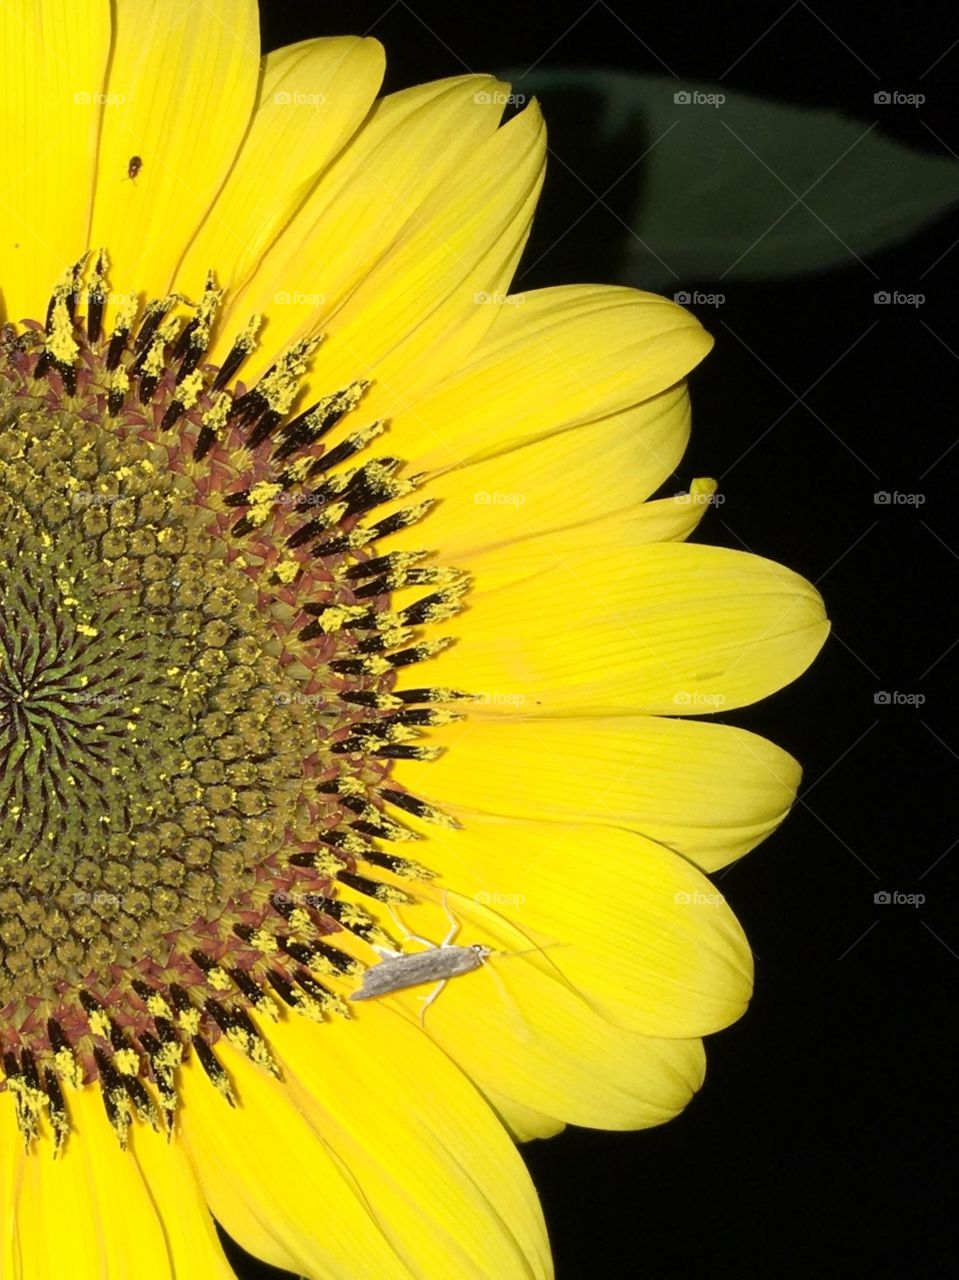 Close Up sunflower pic using flash, 2 bugs are visible! Bright yellow with flash🌻 Great details.